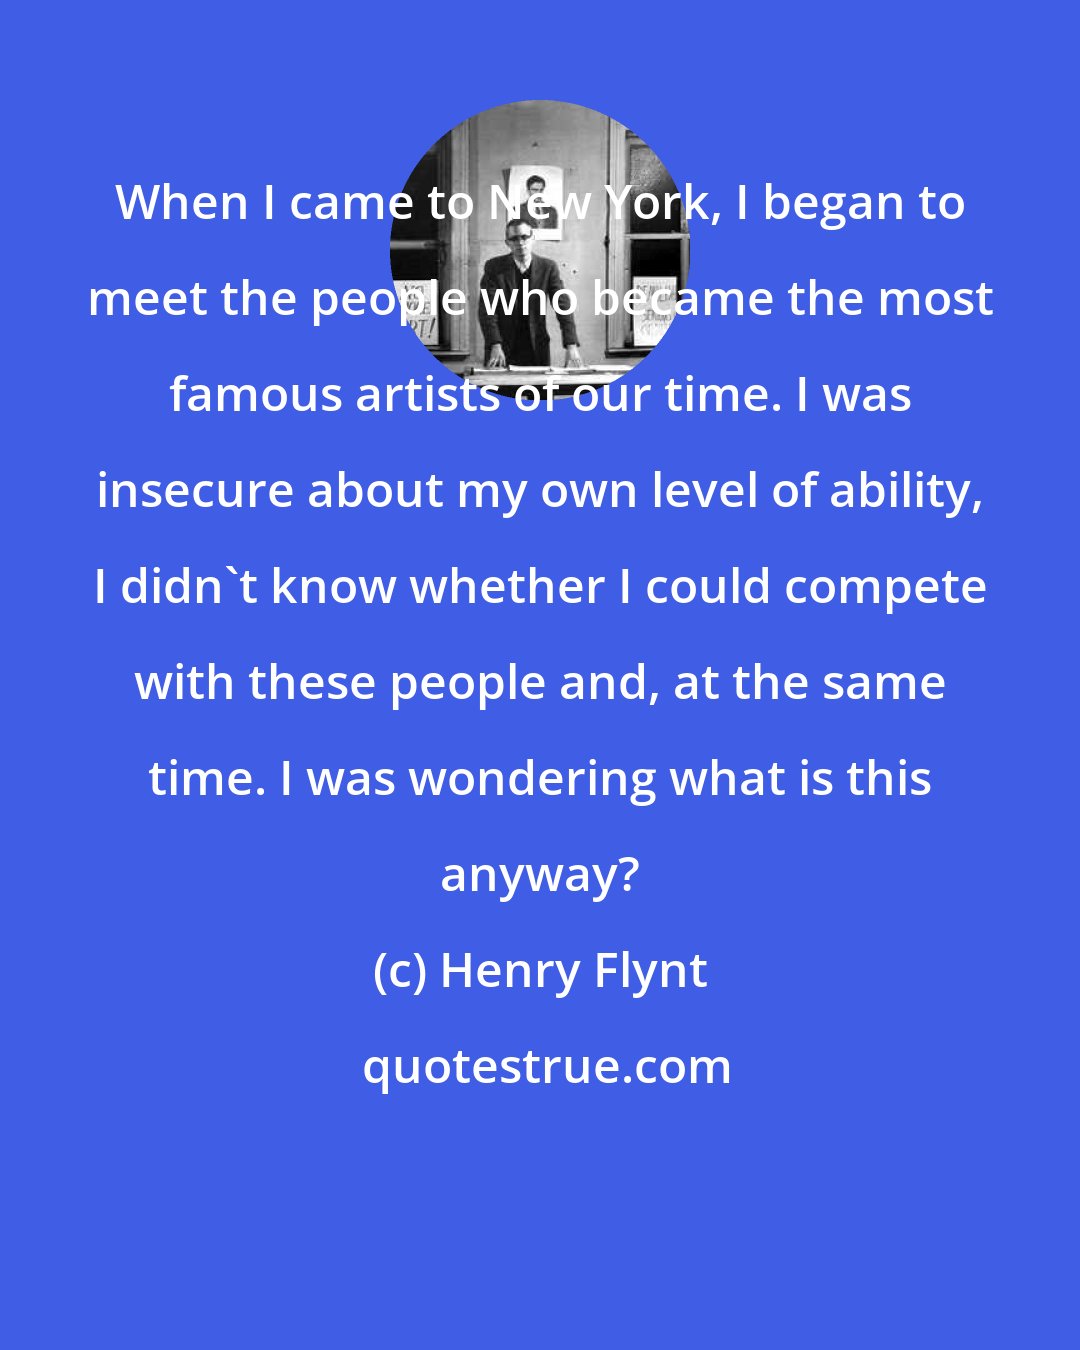 Henry Flynt: When I came to New York, I began to meet the people who became the most famous artists of our time. I was insecure about my own level of ability, I didn't know whether I could compete with these people and, at the same time. I was wondering what is this anyway?